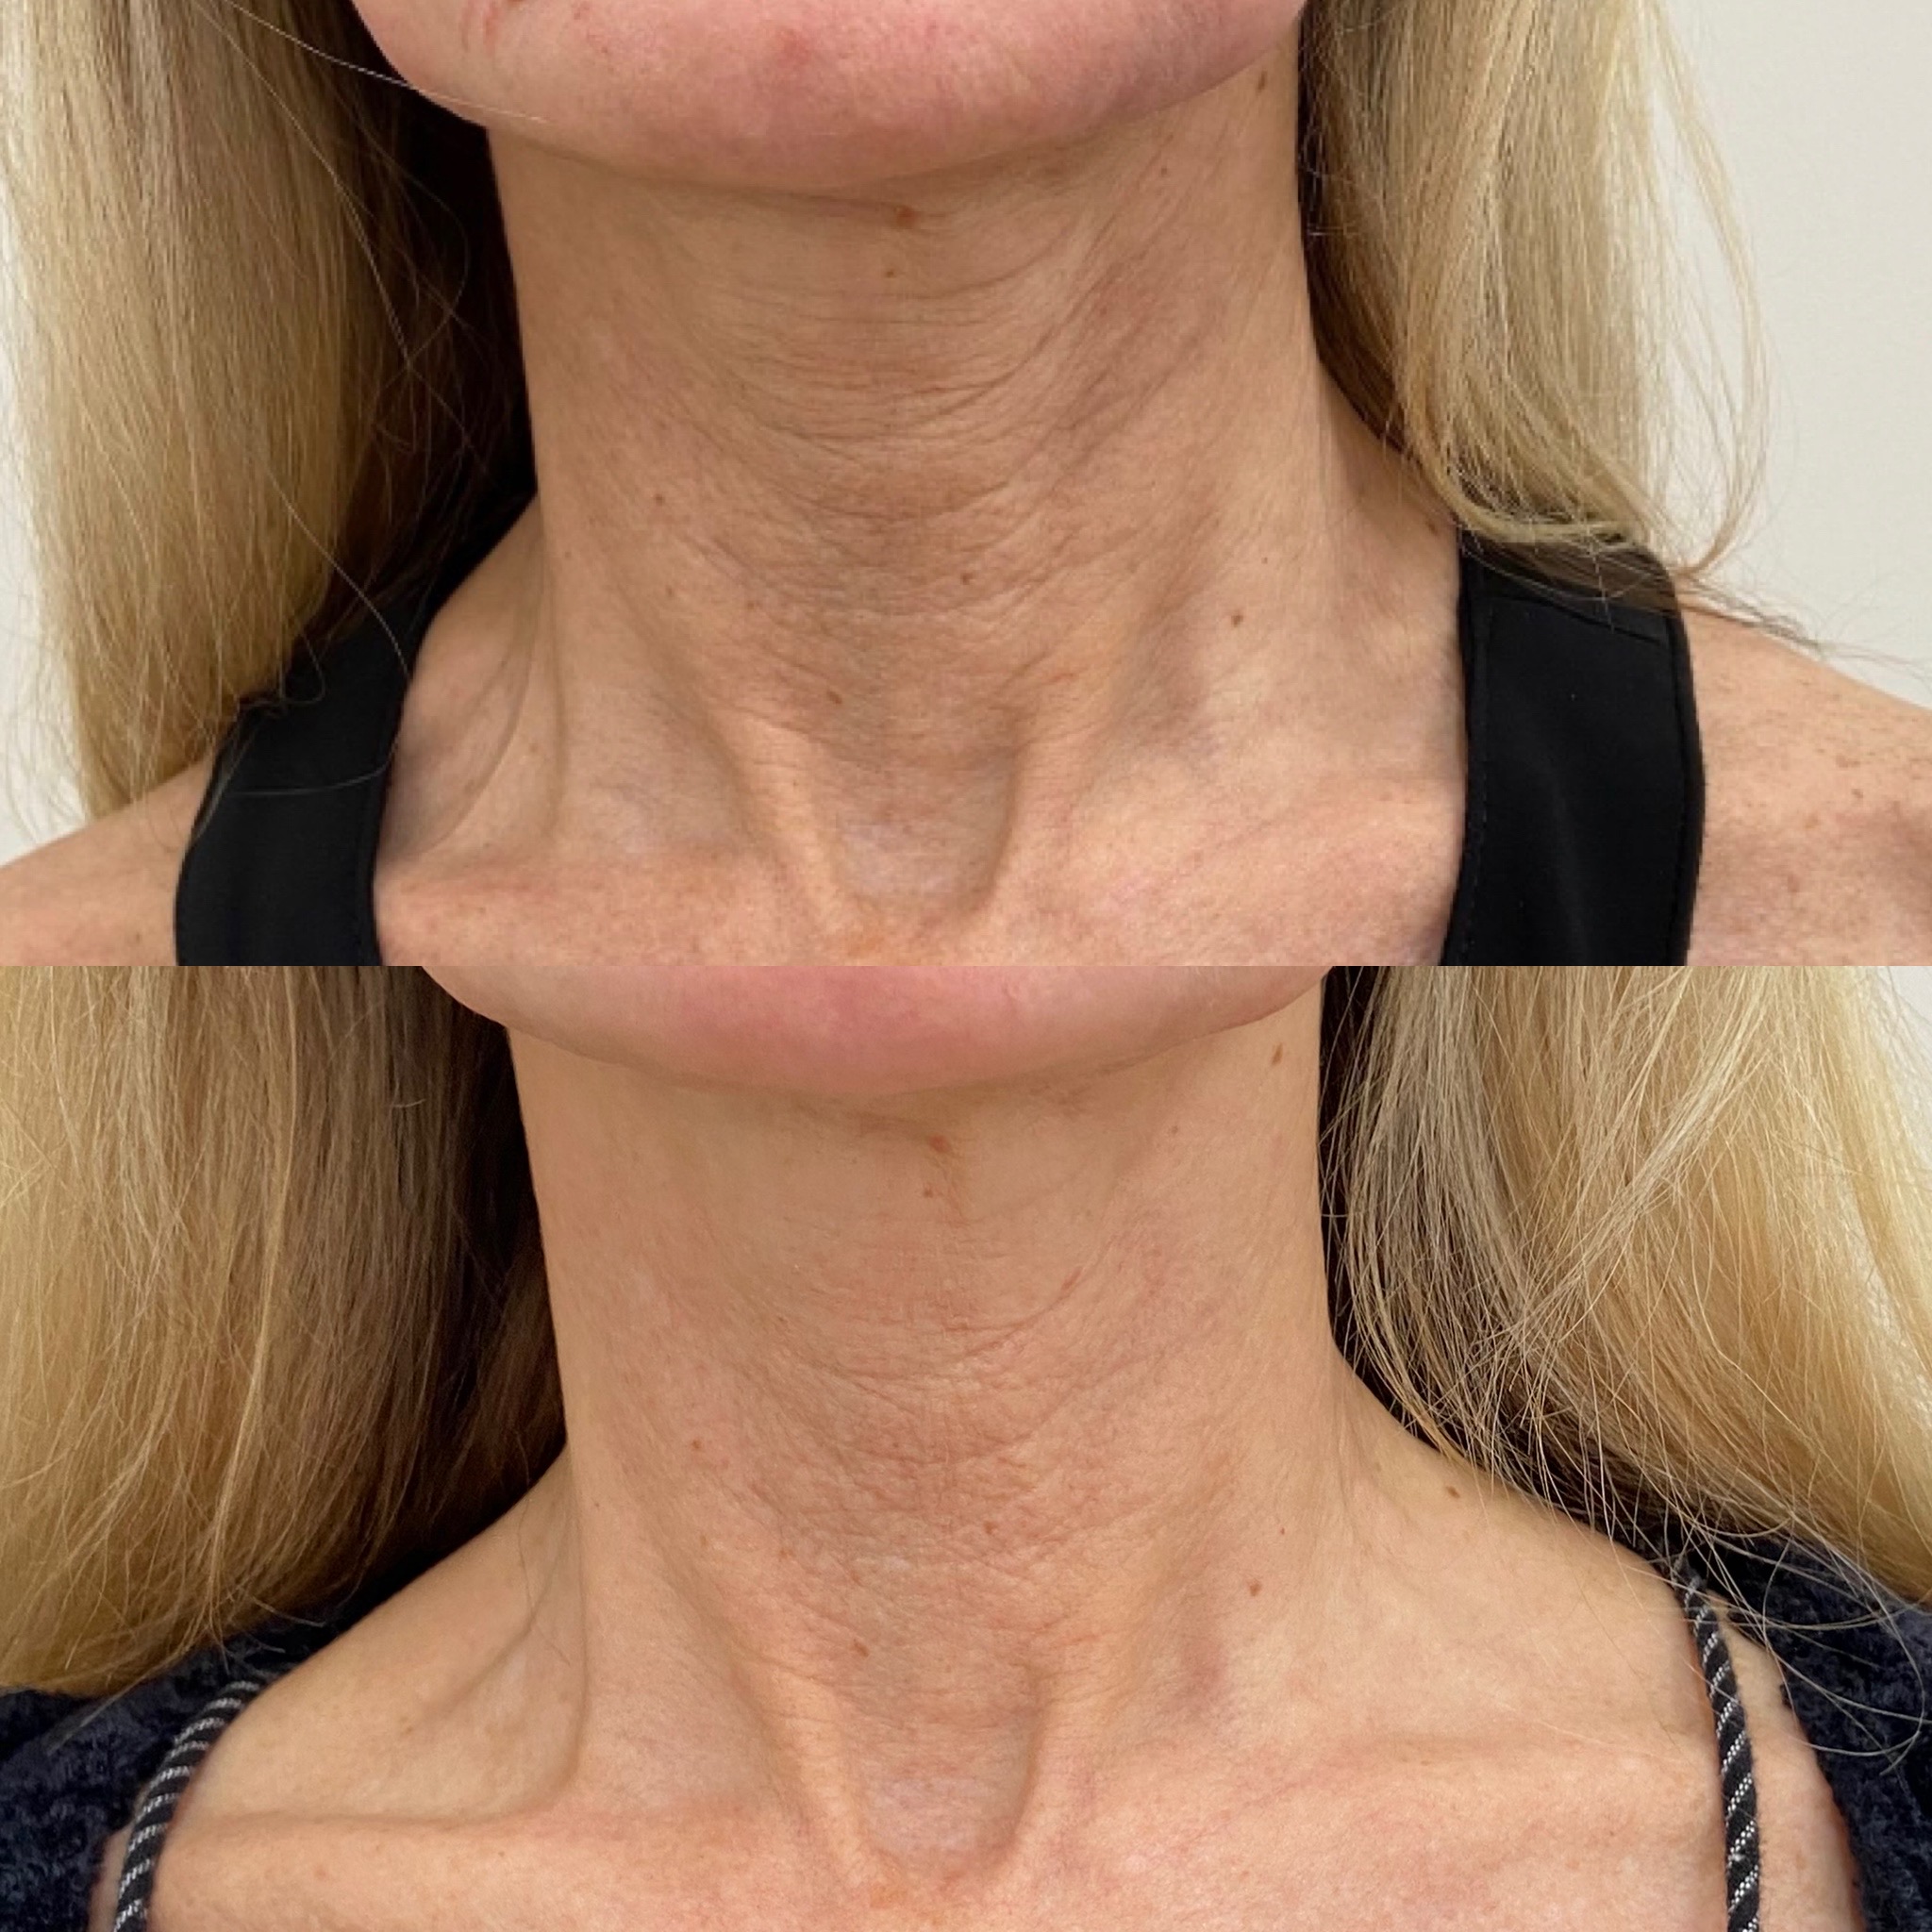 Before and After Botox treatment on Neck | Beauty Boost Med Spa in Newport Beach, CA